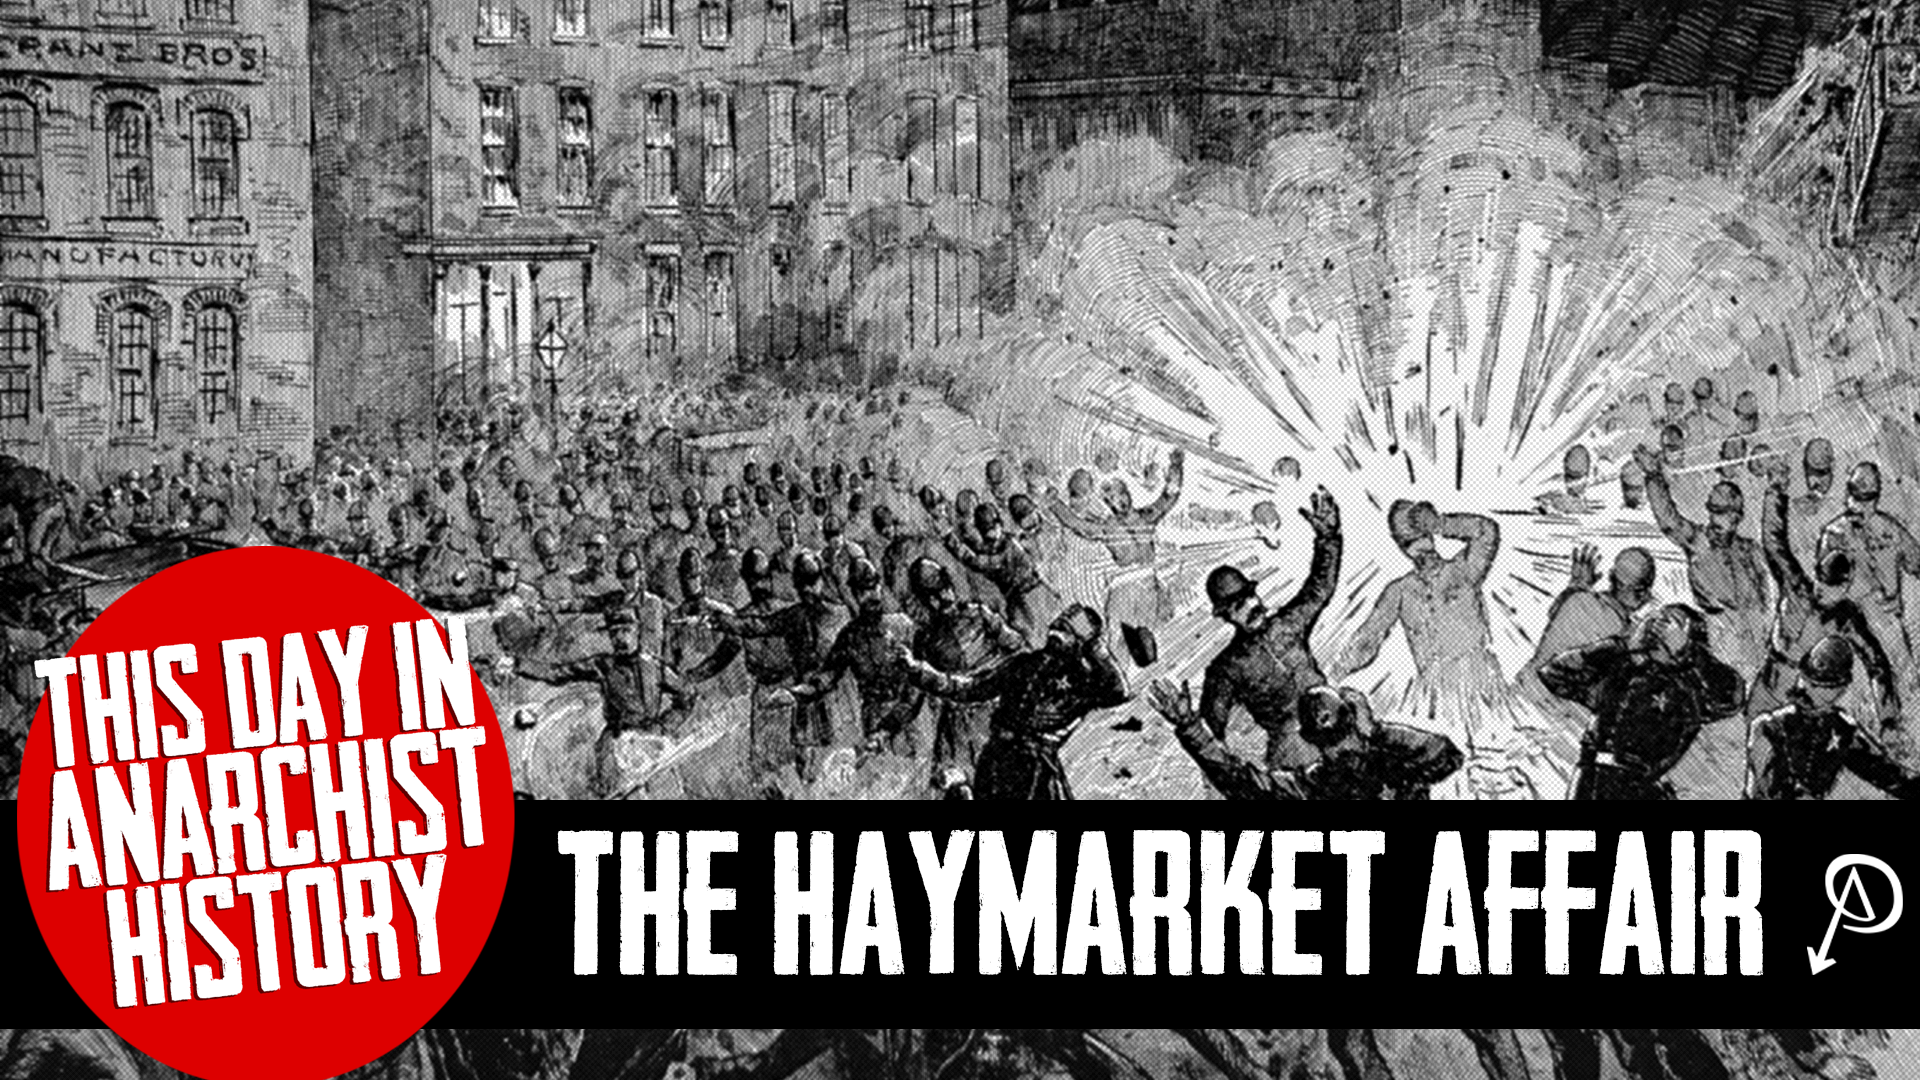 This Day in Anarchist History: The Haymarket Affair